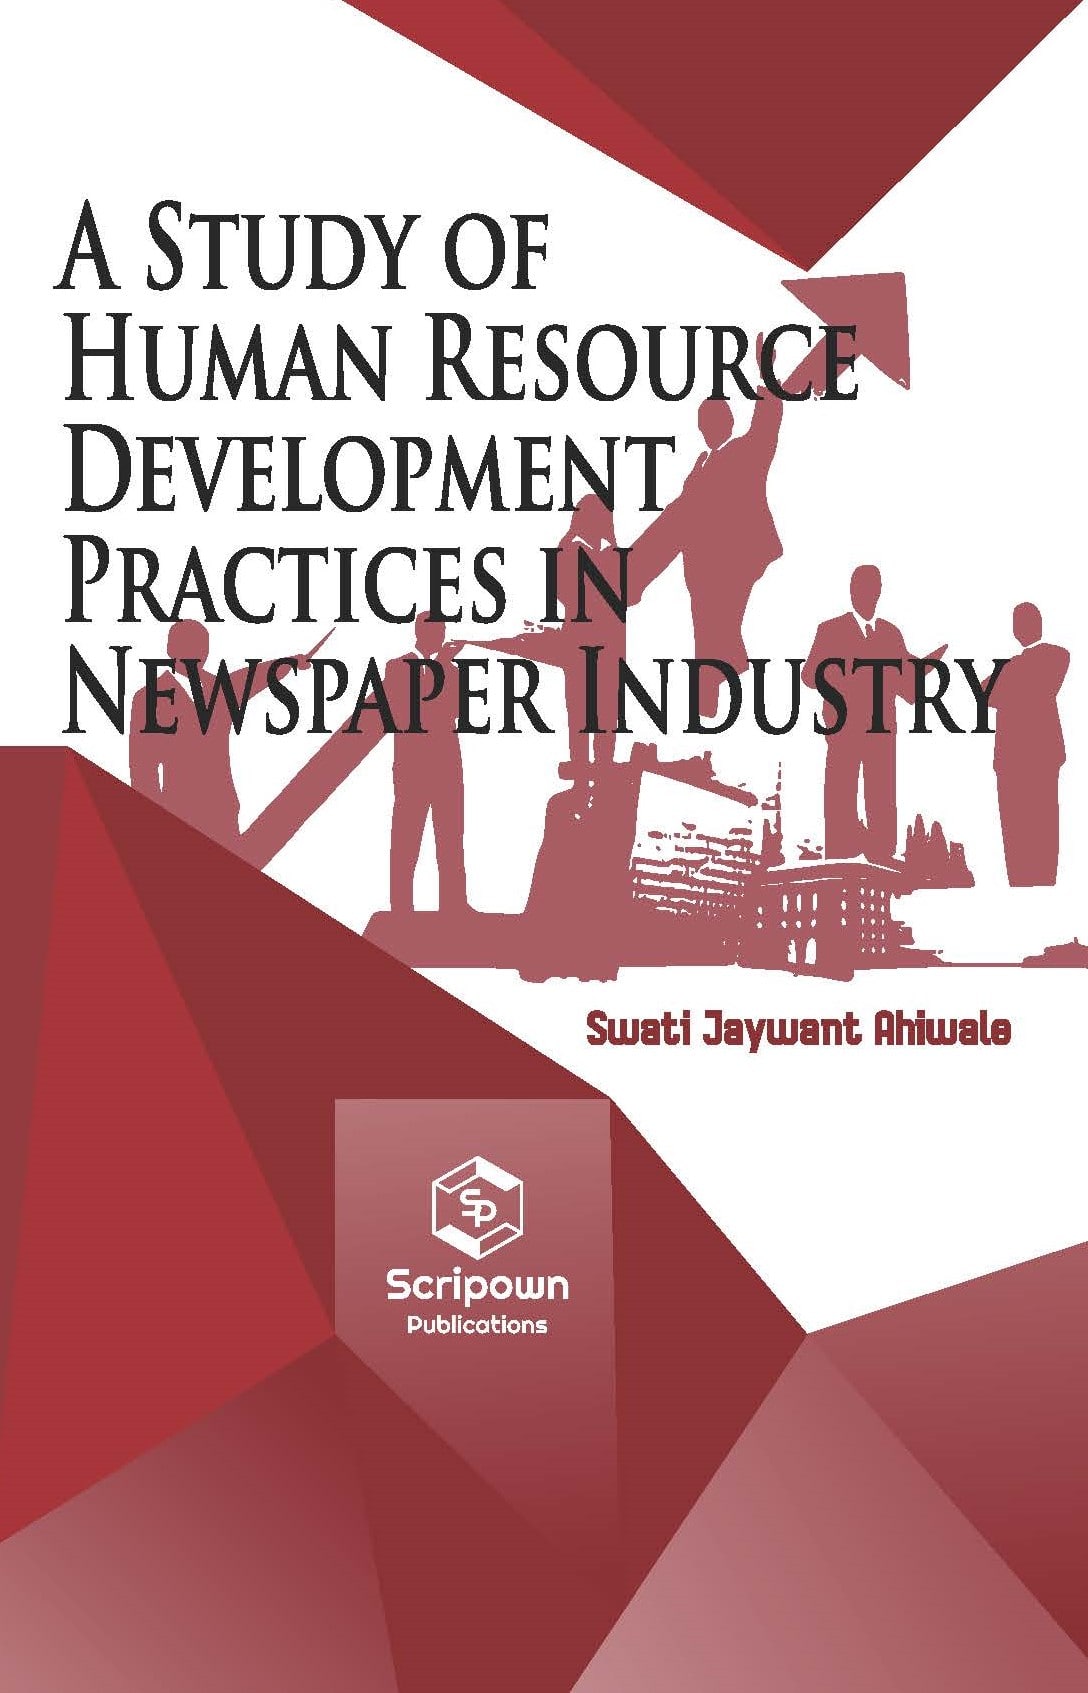 A Study of Human Resource Development Practices in Newspaper Industry